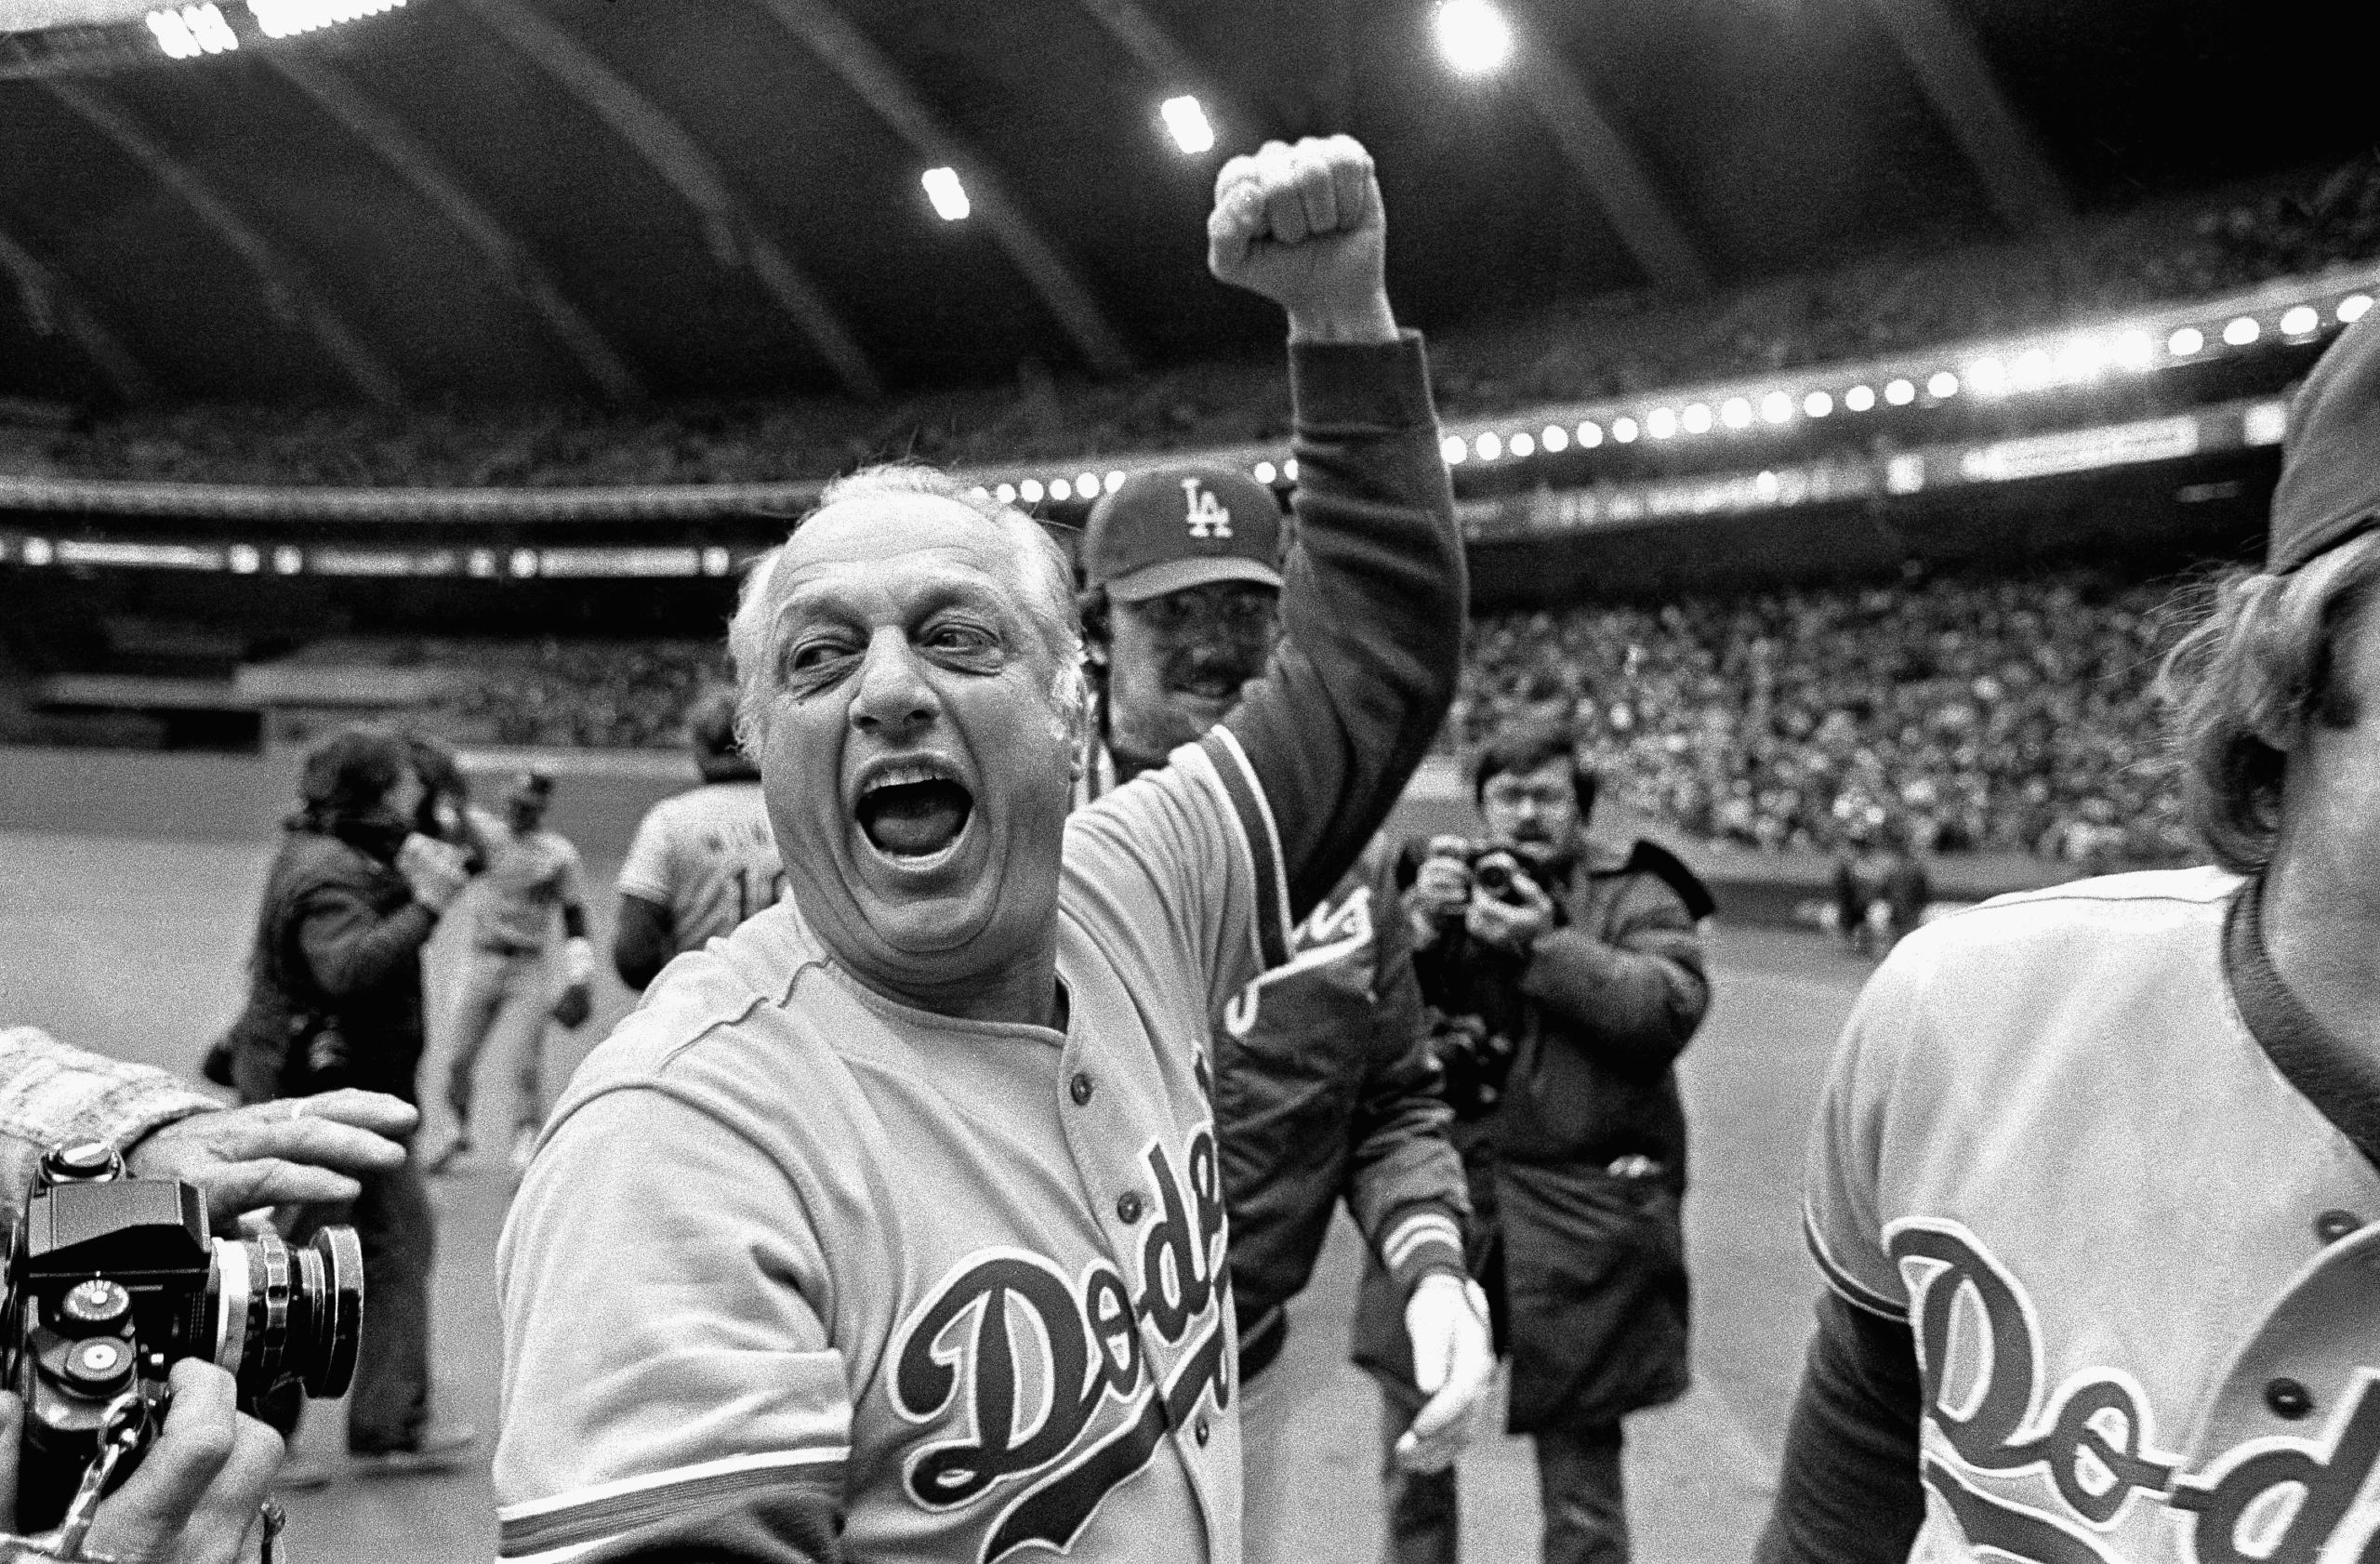 Los Angeles Dodgers manager Tom Lasorda celebrates after the Dodgers beat the Montreal Expos for the National League title in Montreal, in this Monday, Oct. 19, 1981, file photo. Tommy Lasorda, the fiery Hall of Fame manager who guided the Los Angeles Dodgers to two World Series titles and later became an ambassador for the sport he loved during his 71 years with the franchise, has died. He was 93. The Dodgers said Friday, Jan. 8, 2021, that he had a heart attack at his home in Fullerton, Calif.